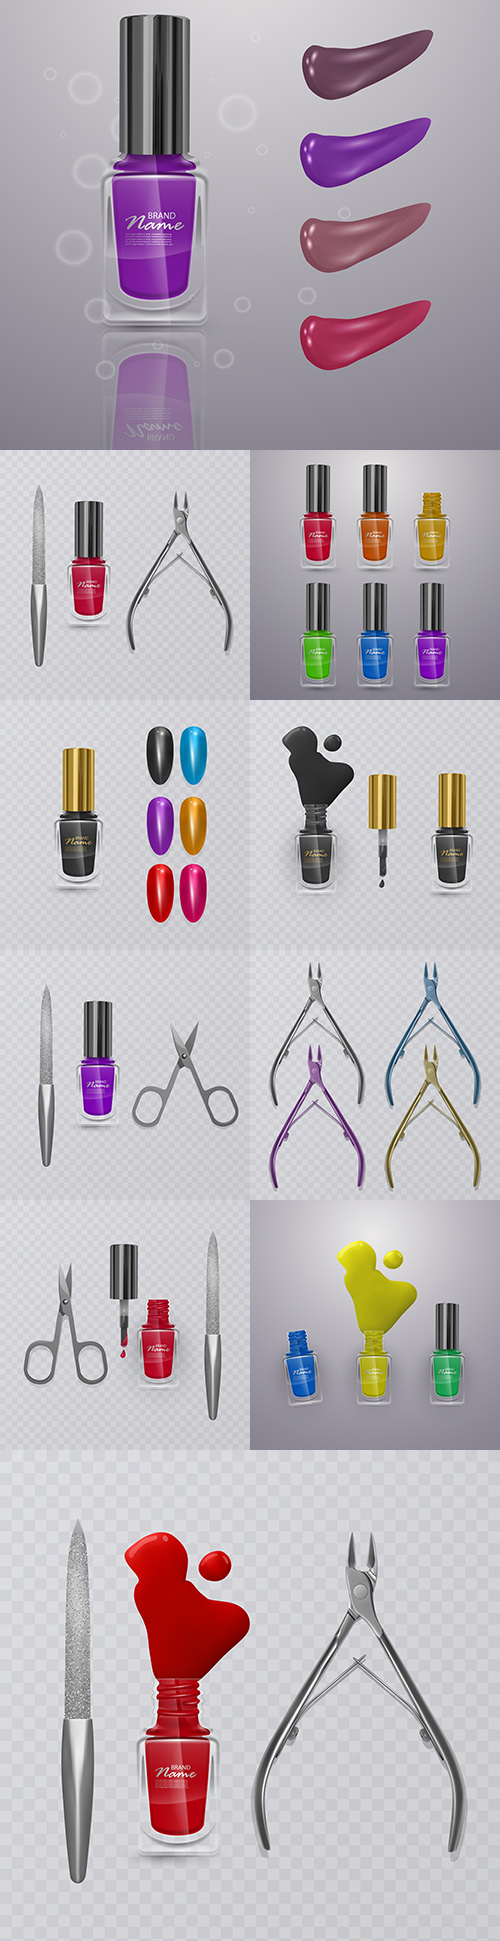 Varnish bright colors and set accessories for manicure 3d illustration
